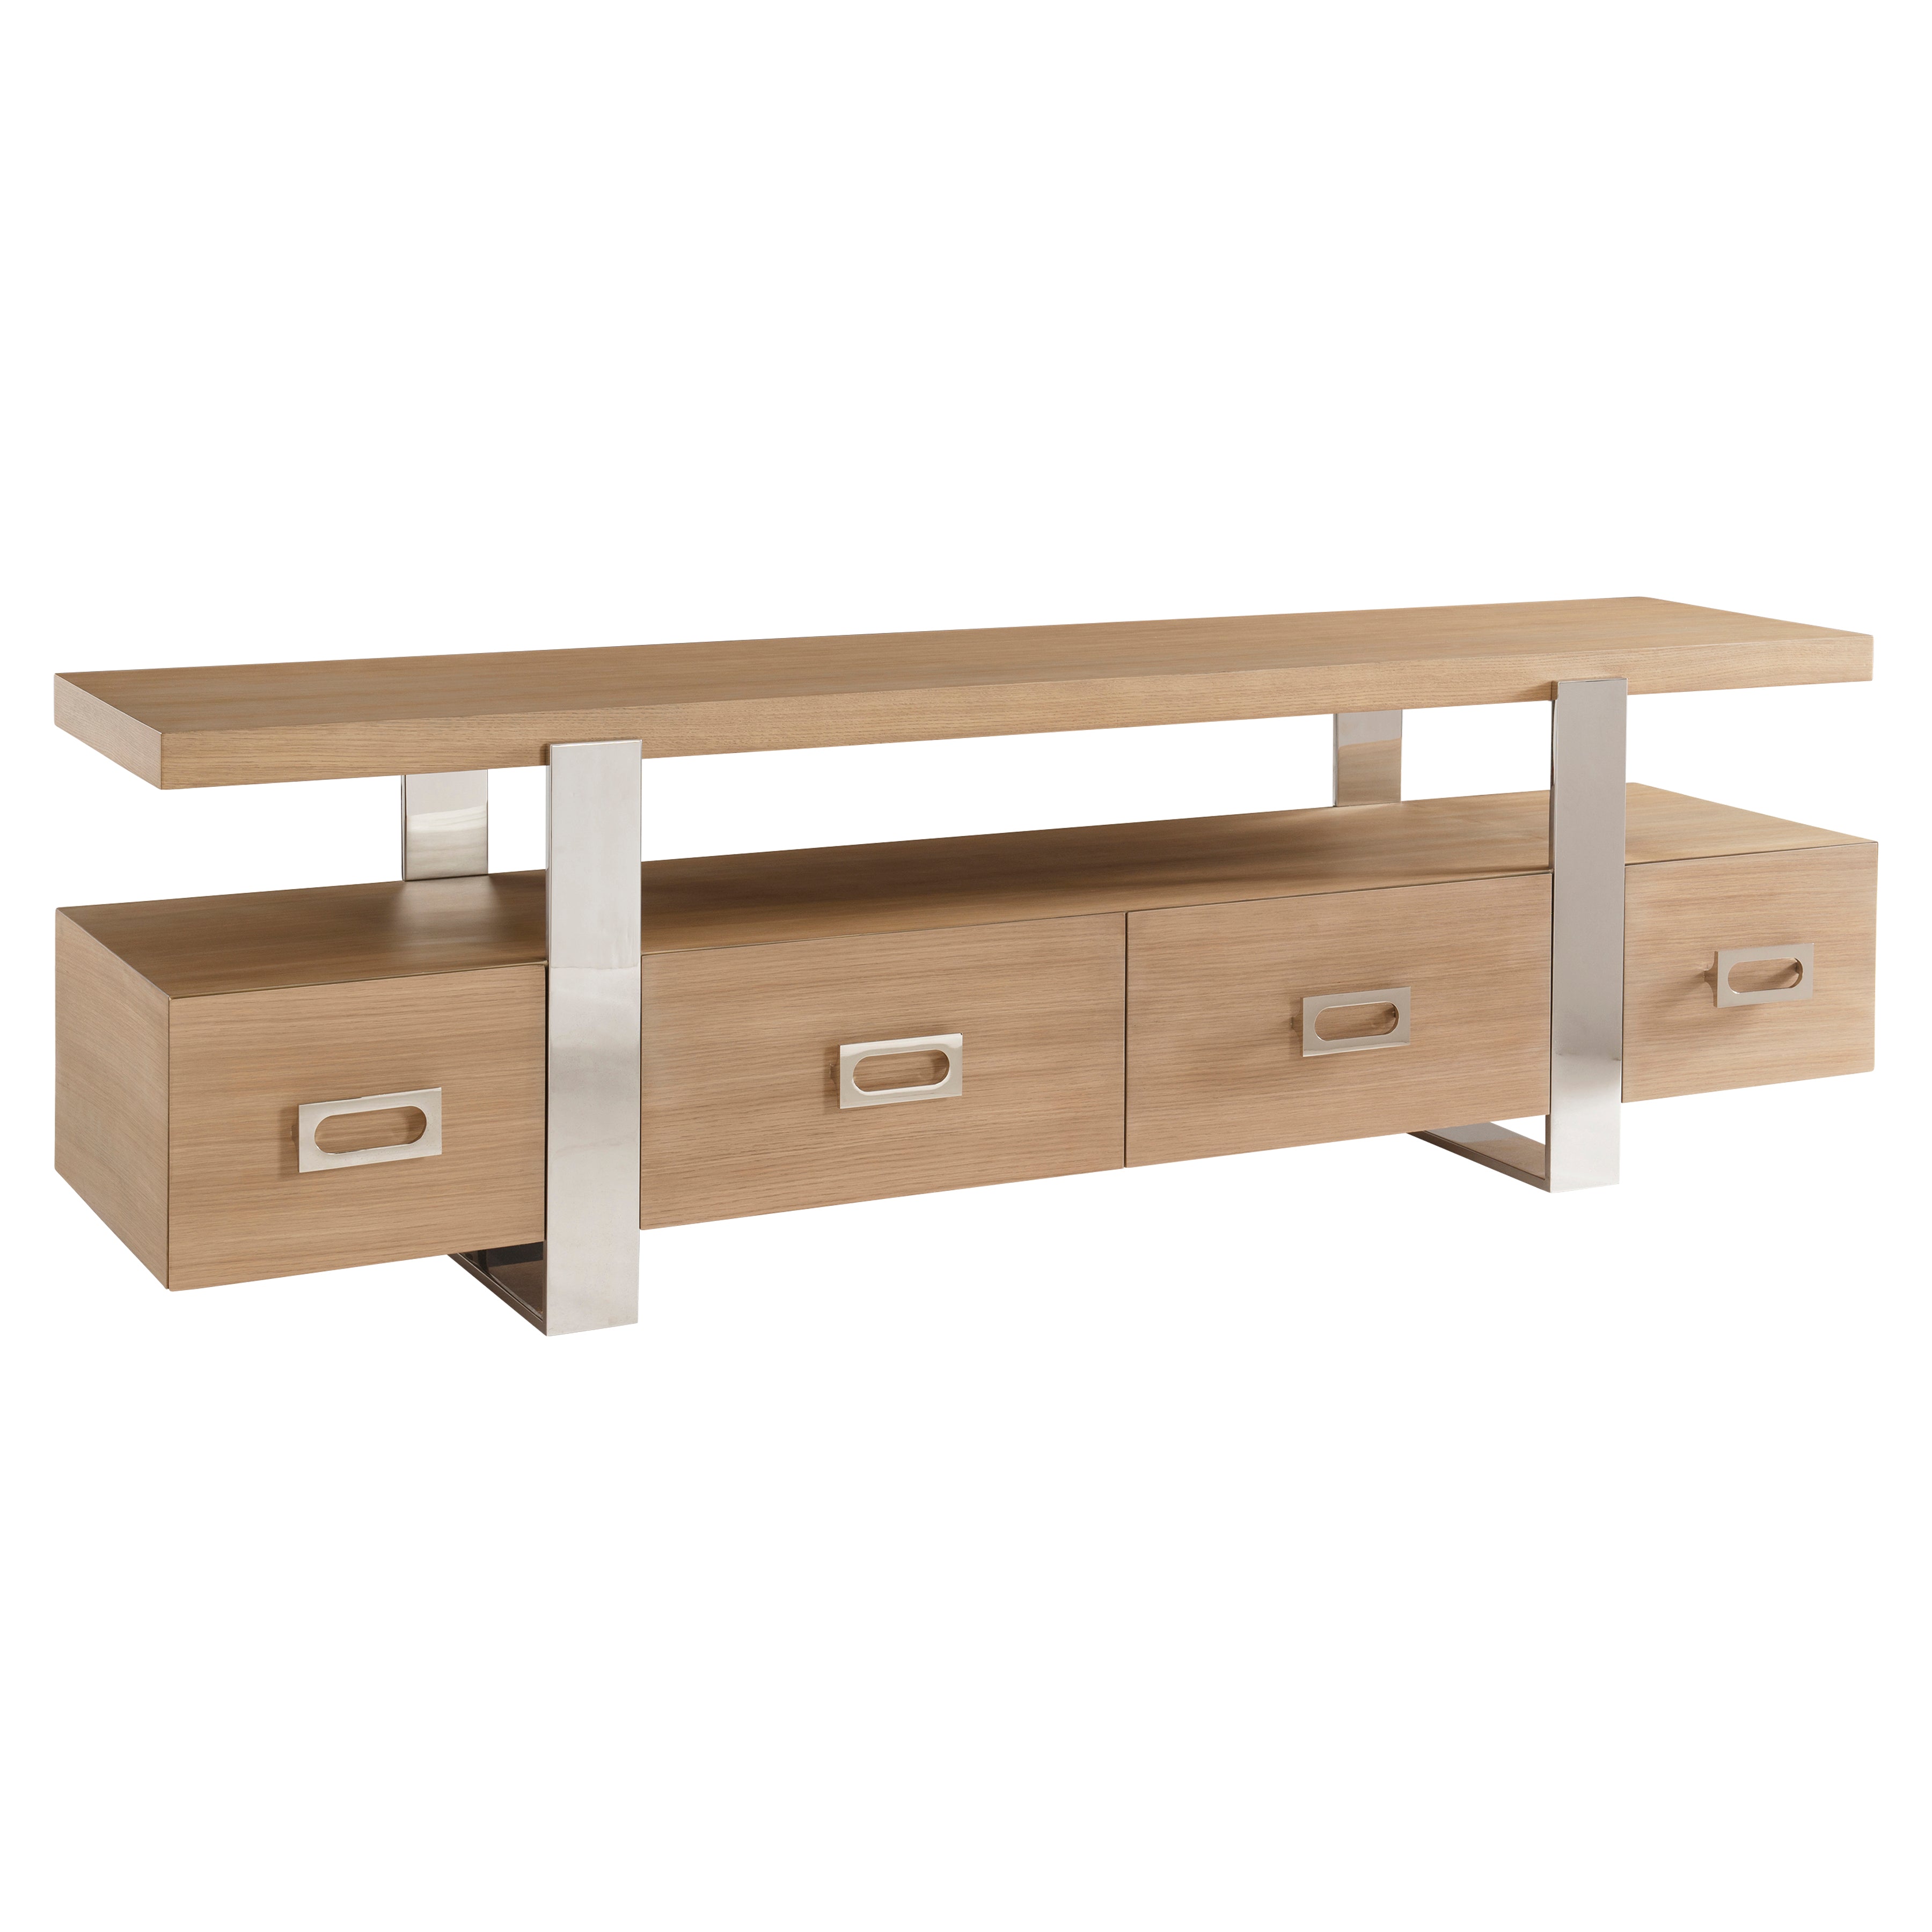 Modulum Entertainment Credenza with 4 Drawers